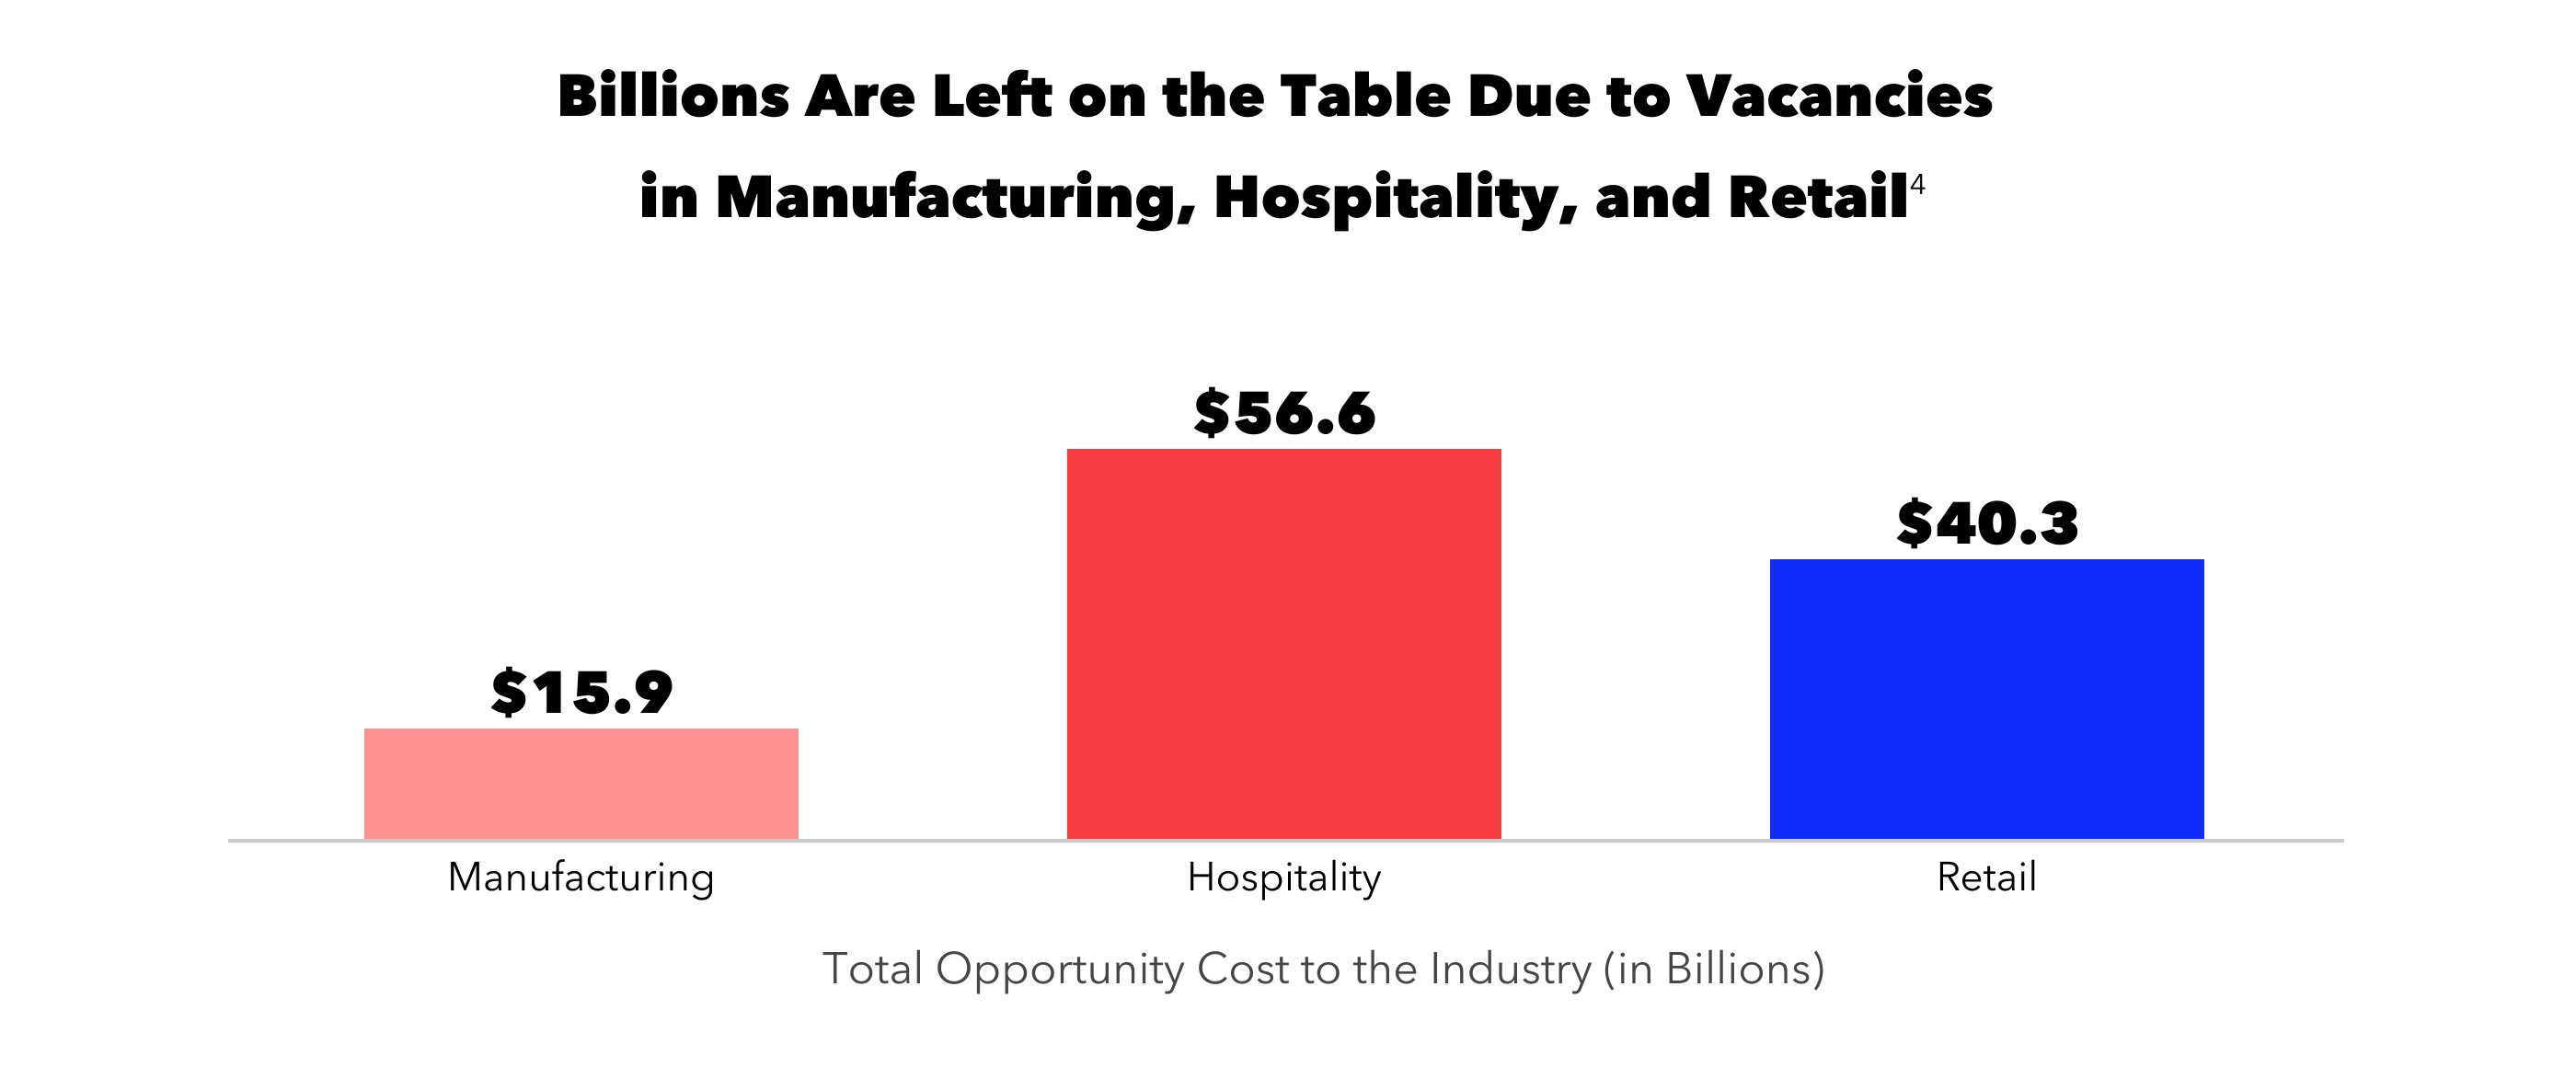 Billions are left on the table due to vacancies in manufacturing, hospitality, and retail.